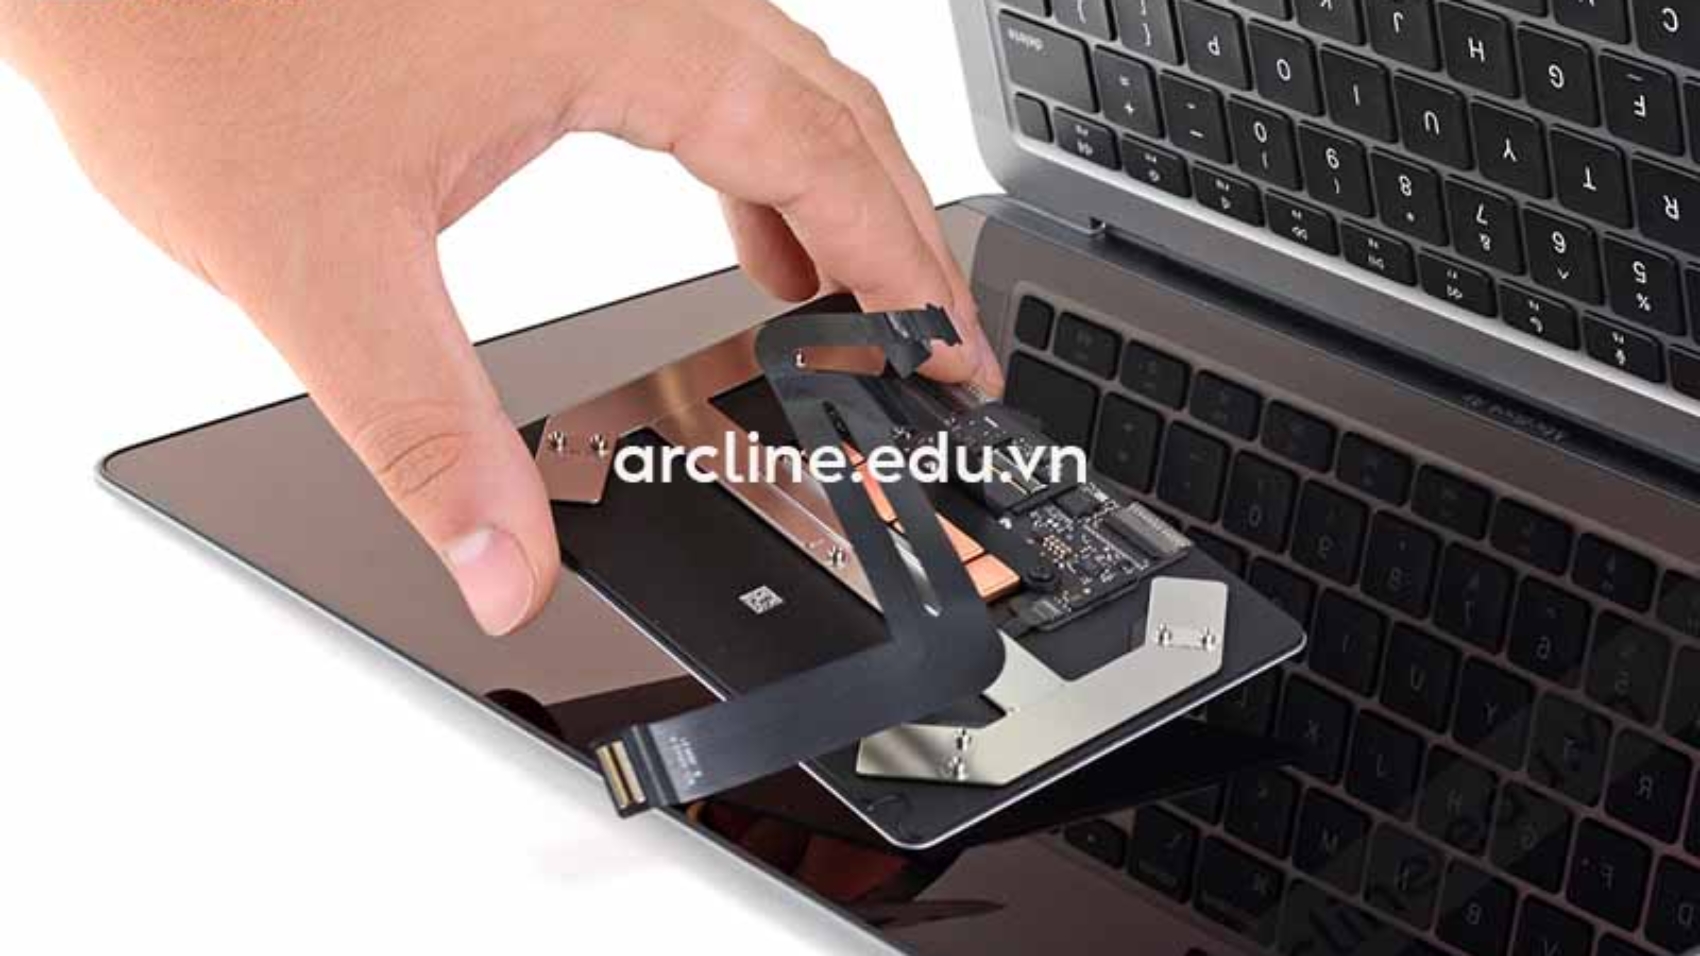 cach sua touchpad laptop 1